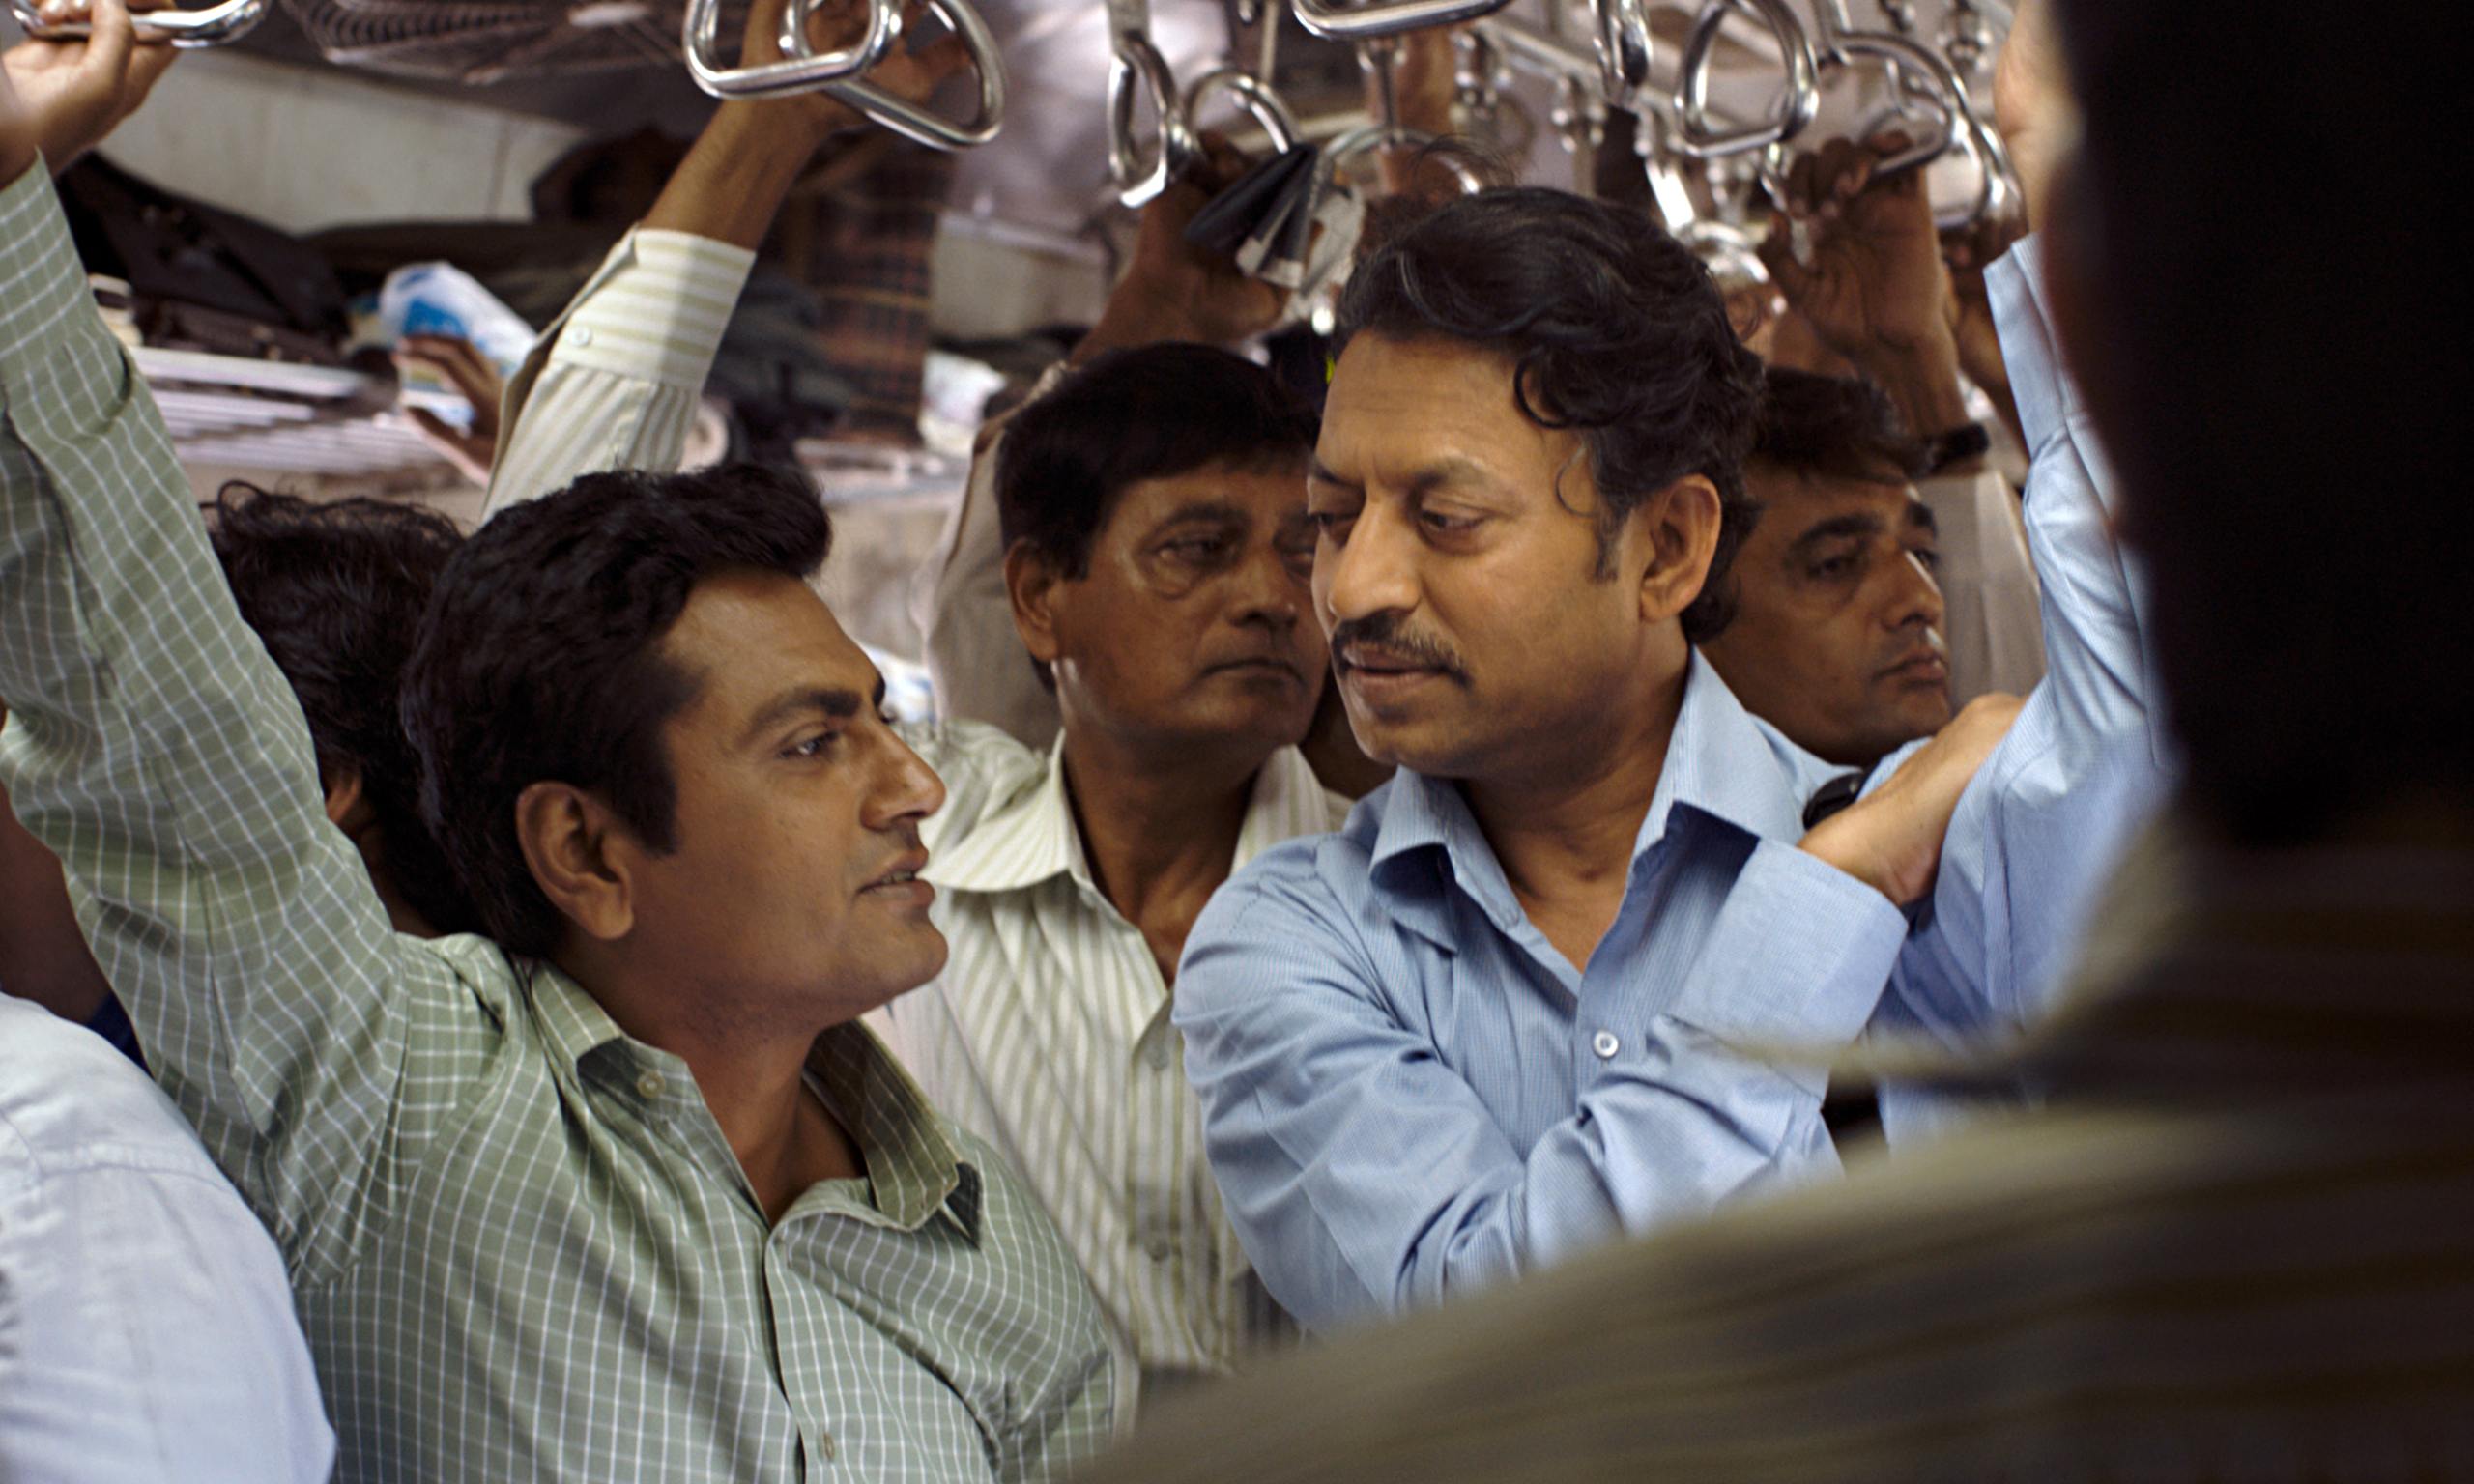 The Lunchbox director on India's new taste for realism | Film | The Guardian